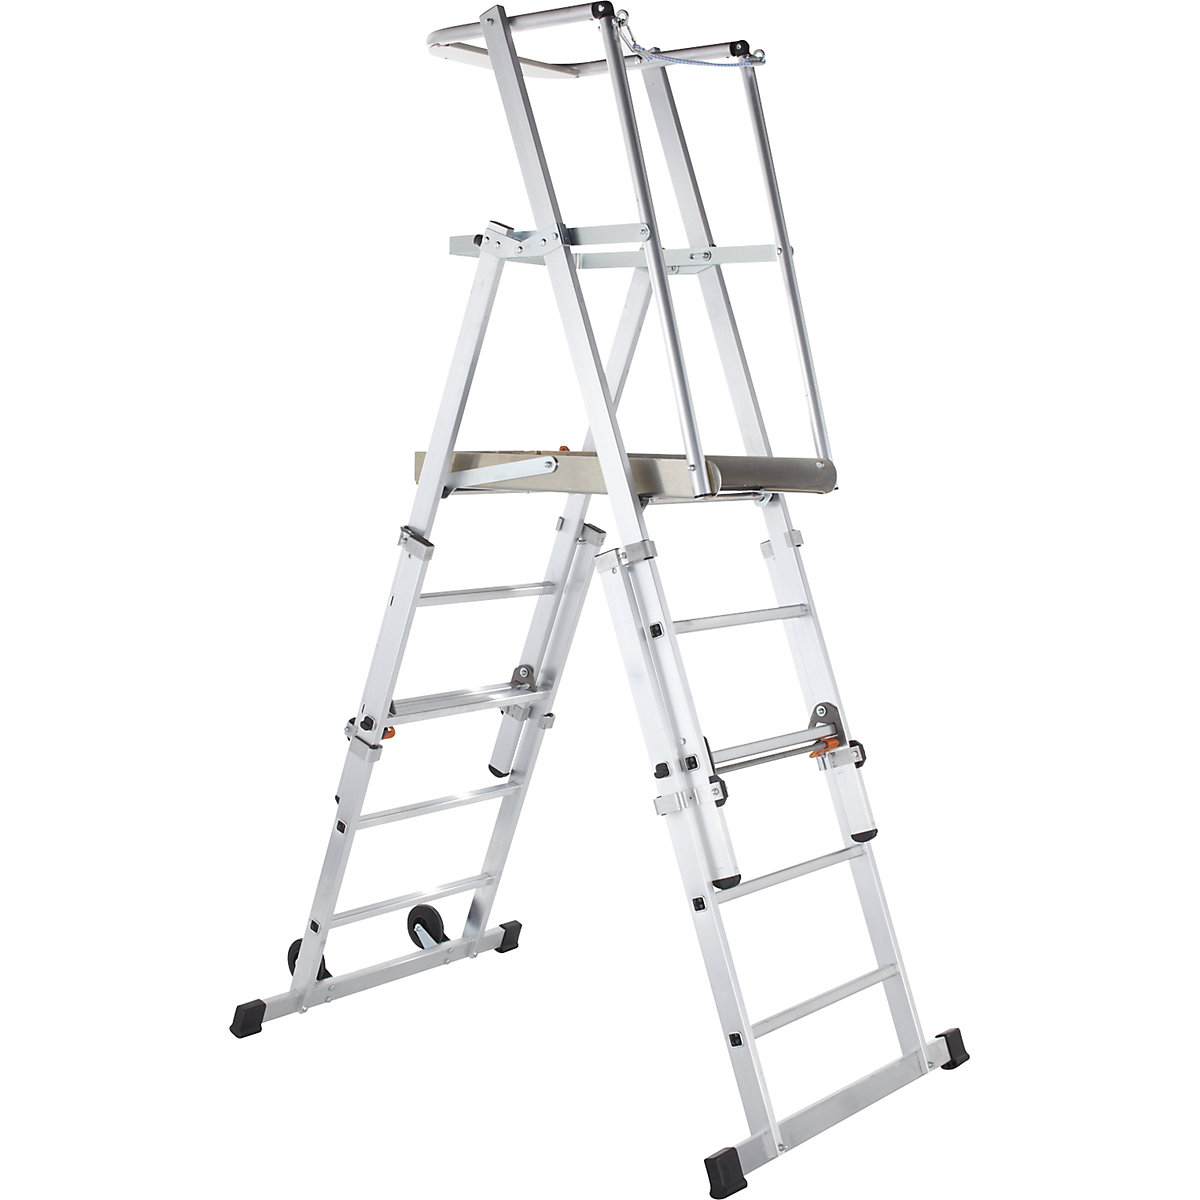 Telescopic mobile safety steps – ZARGES